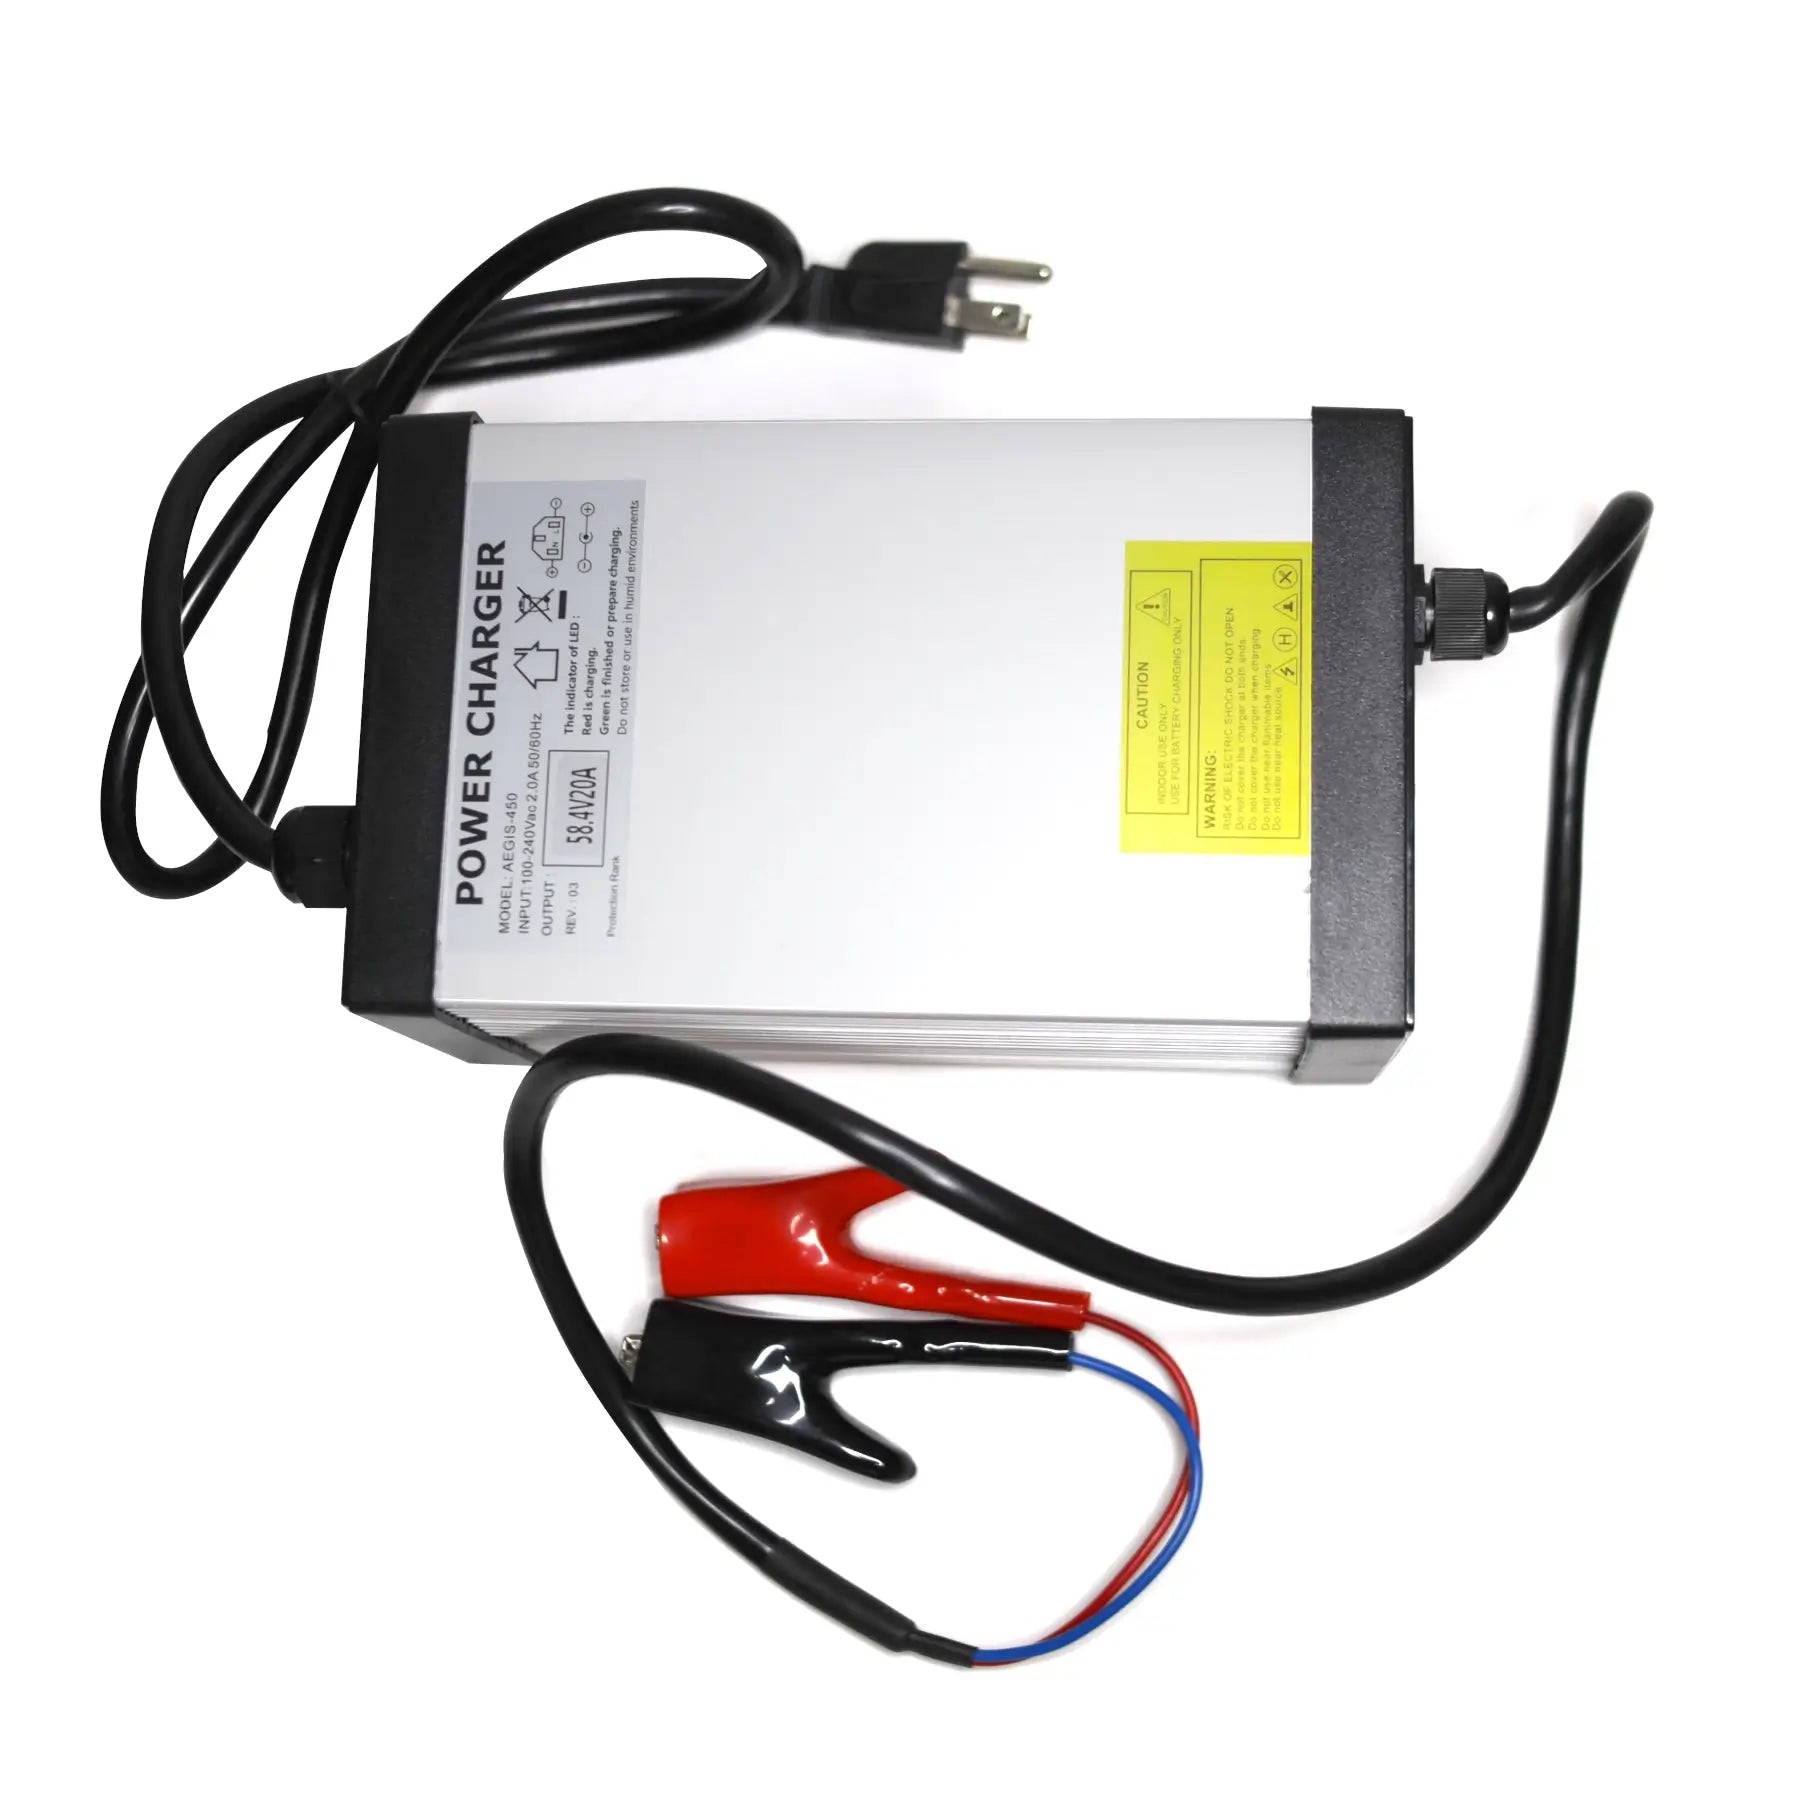 48V 20A Li-ion Battery Charger - Aegis Battery Lithium ion